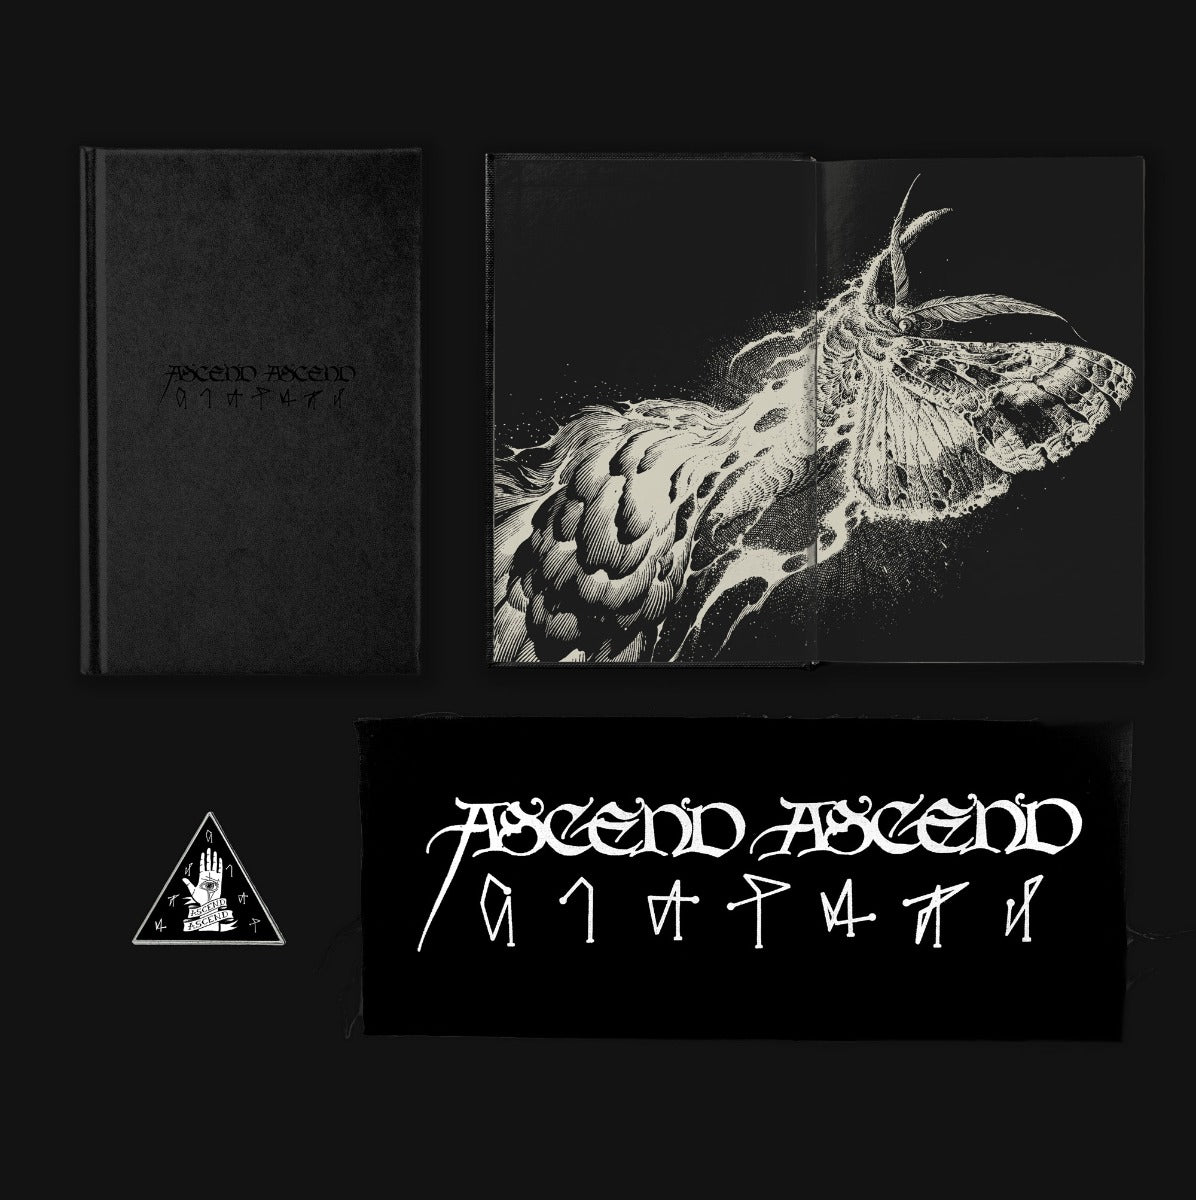 Ascend Ascend: Special Edition
The signed, hardcover, special edition of ASCEND ASCEND by Janaka Stucky from Third Man Books will have a black-on-black foil debossed cover, with the illustration by Aaron Horkey printed across its inside front cover and